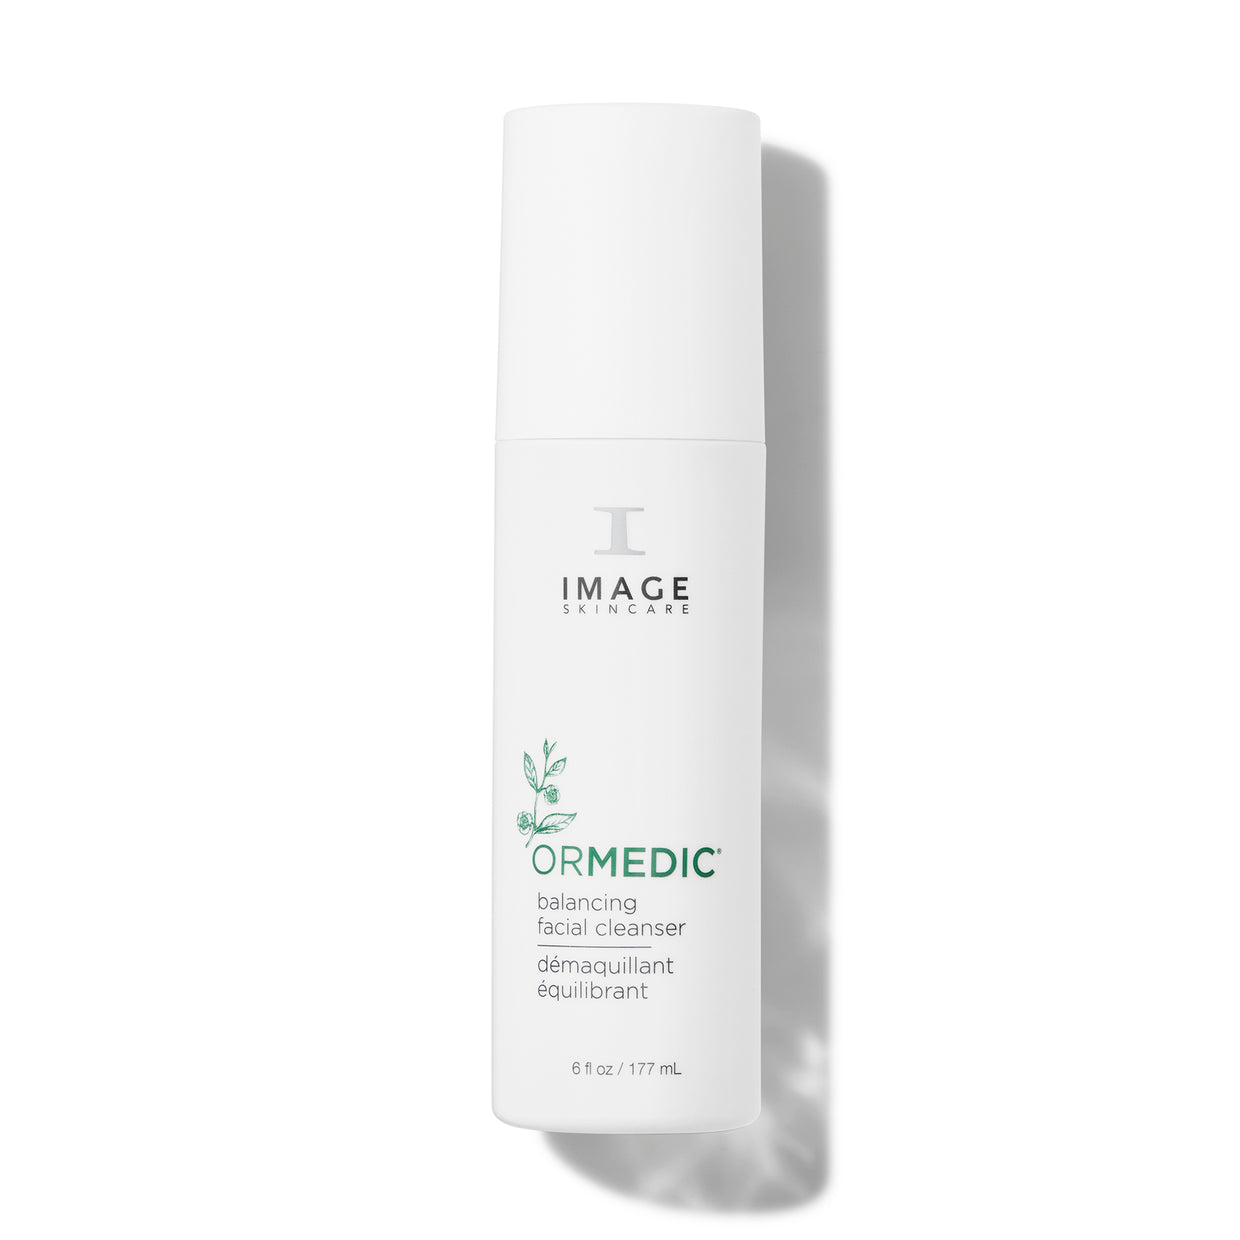 Image Skincare Ormedic Balancing Facial Cleanser Shop At Exclusive Beauty